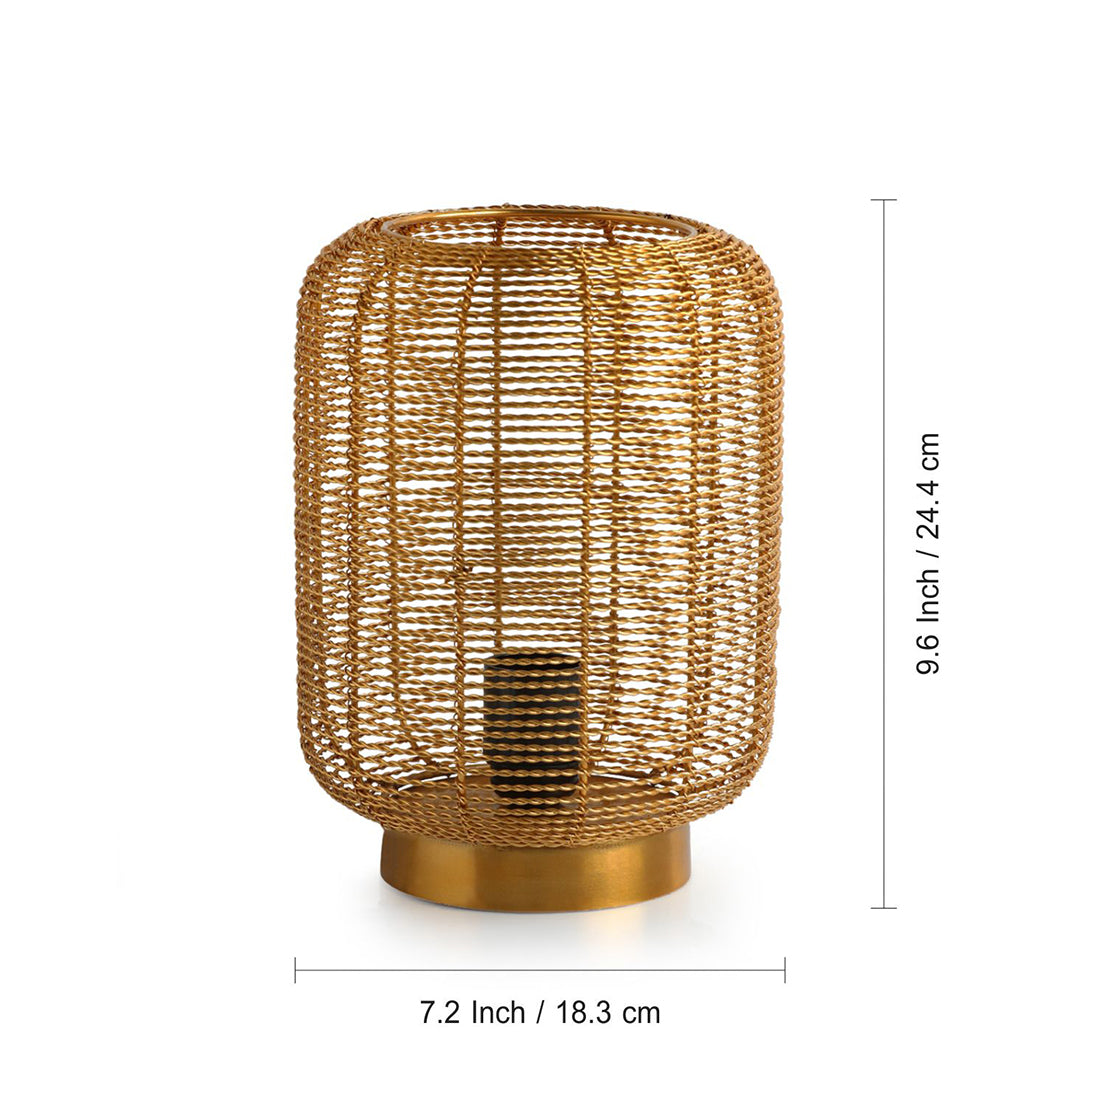 'Weaved Barrel' Handcrafted Table Lamp In Iron (9.6 Inch, Golden)